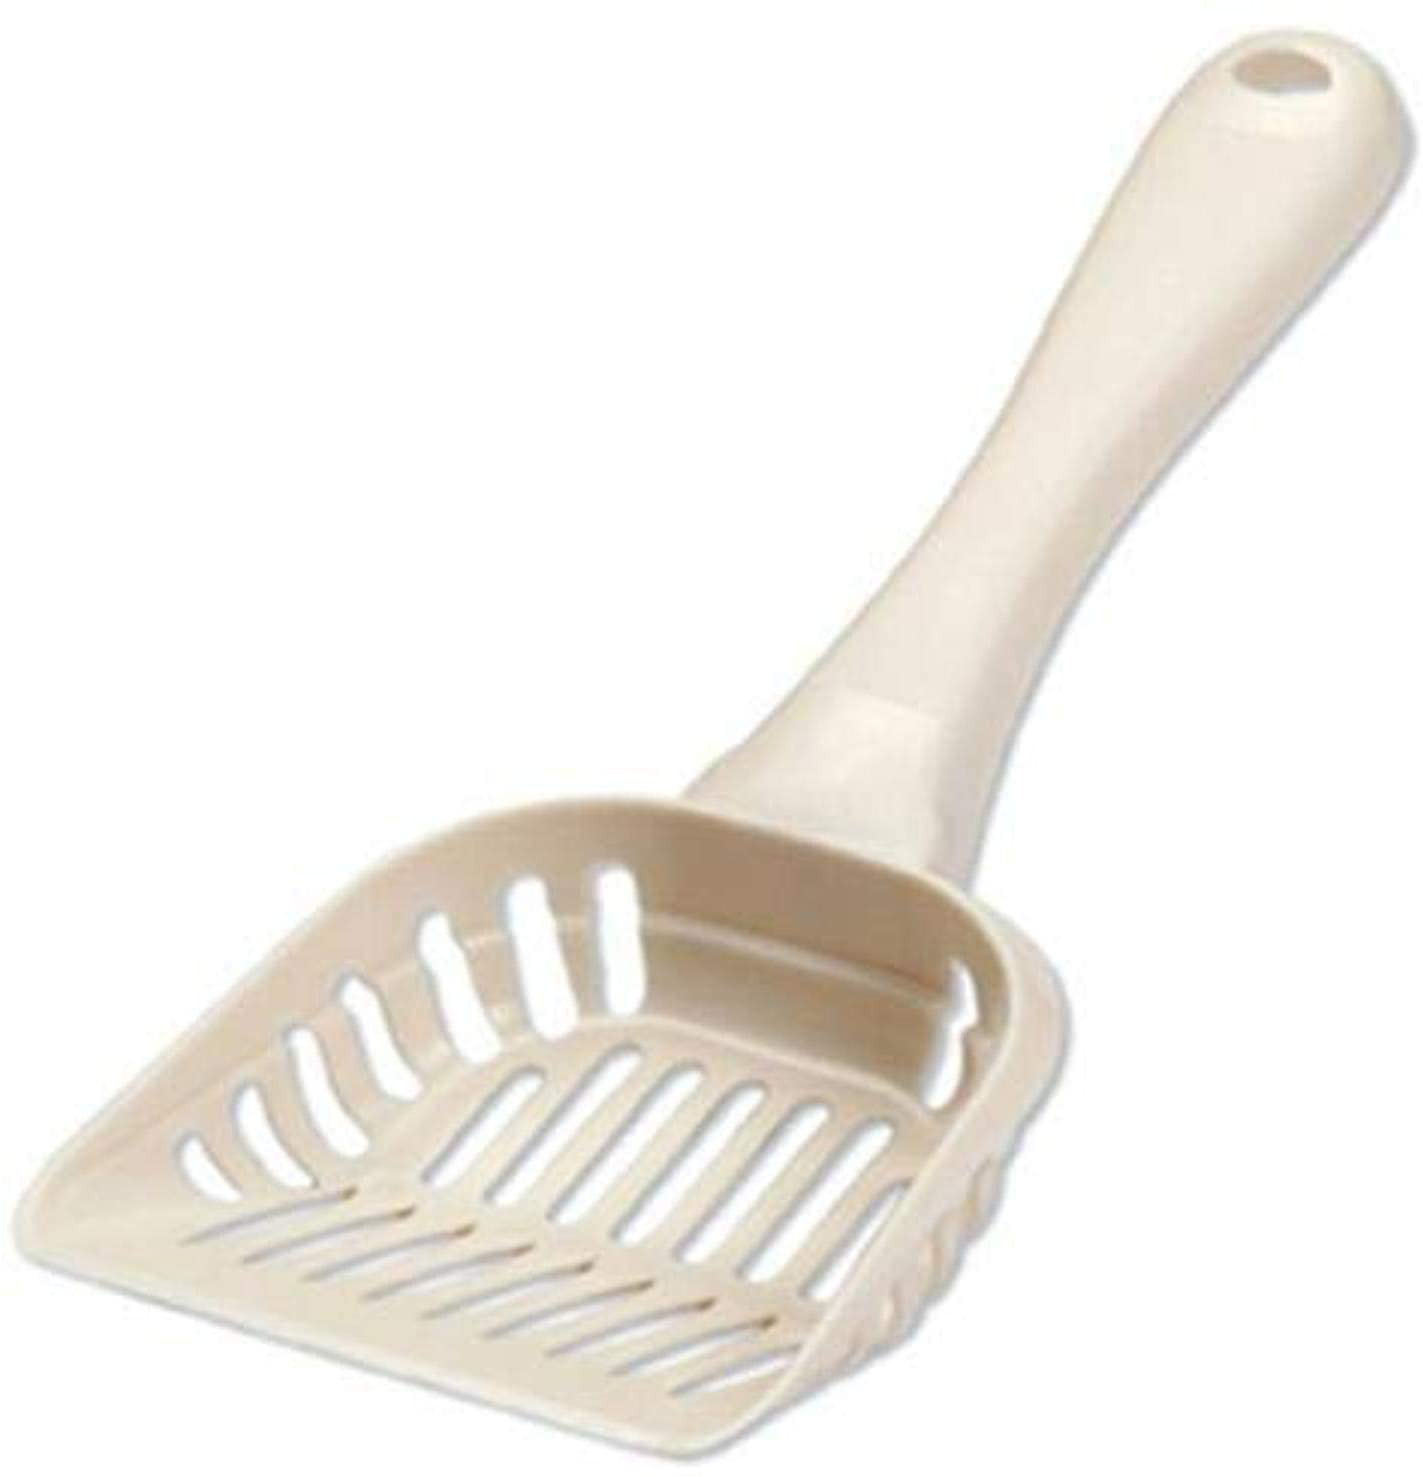 Petmate Litter Scoop W/ Microban, Large - 29111,bleached Linen